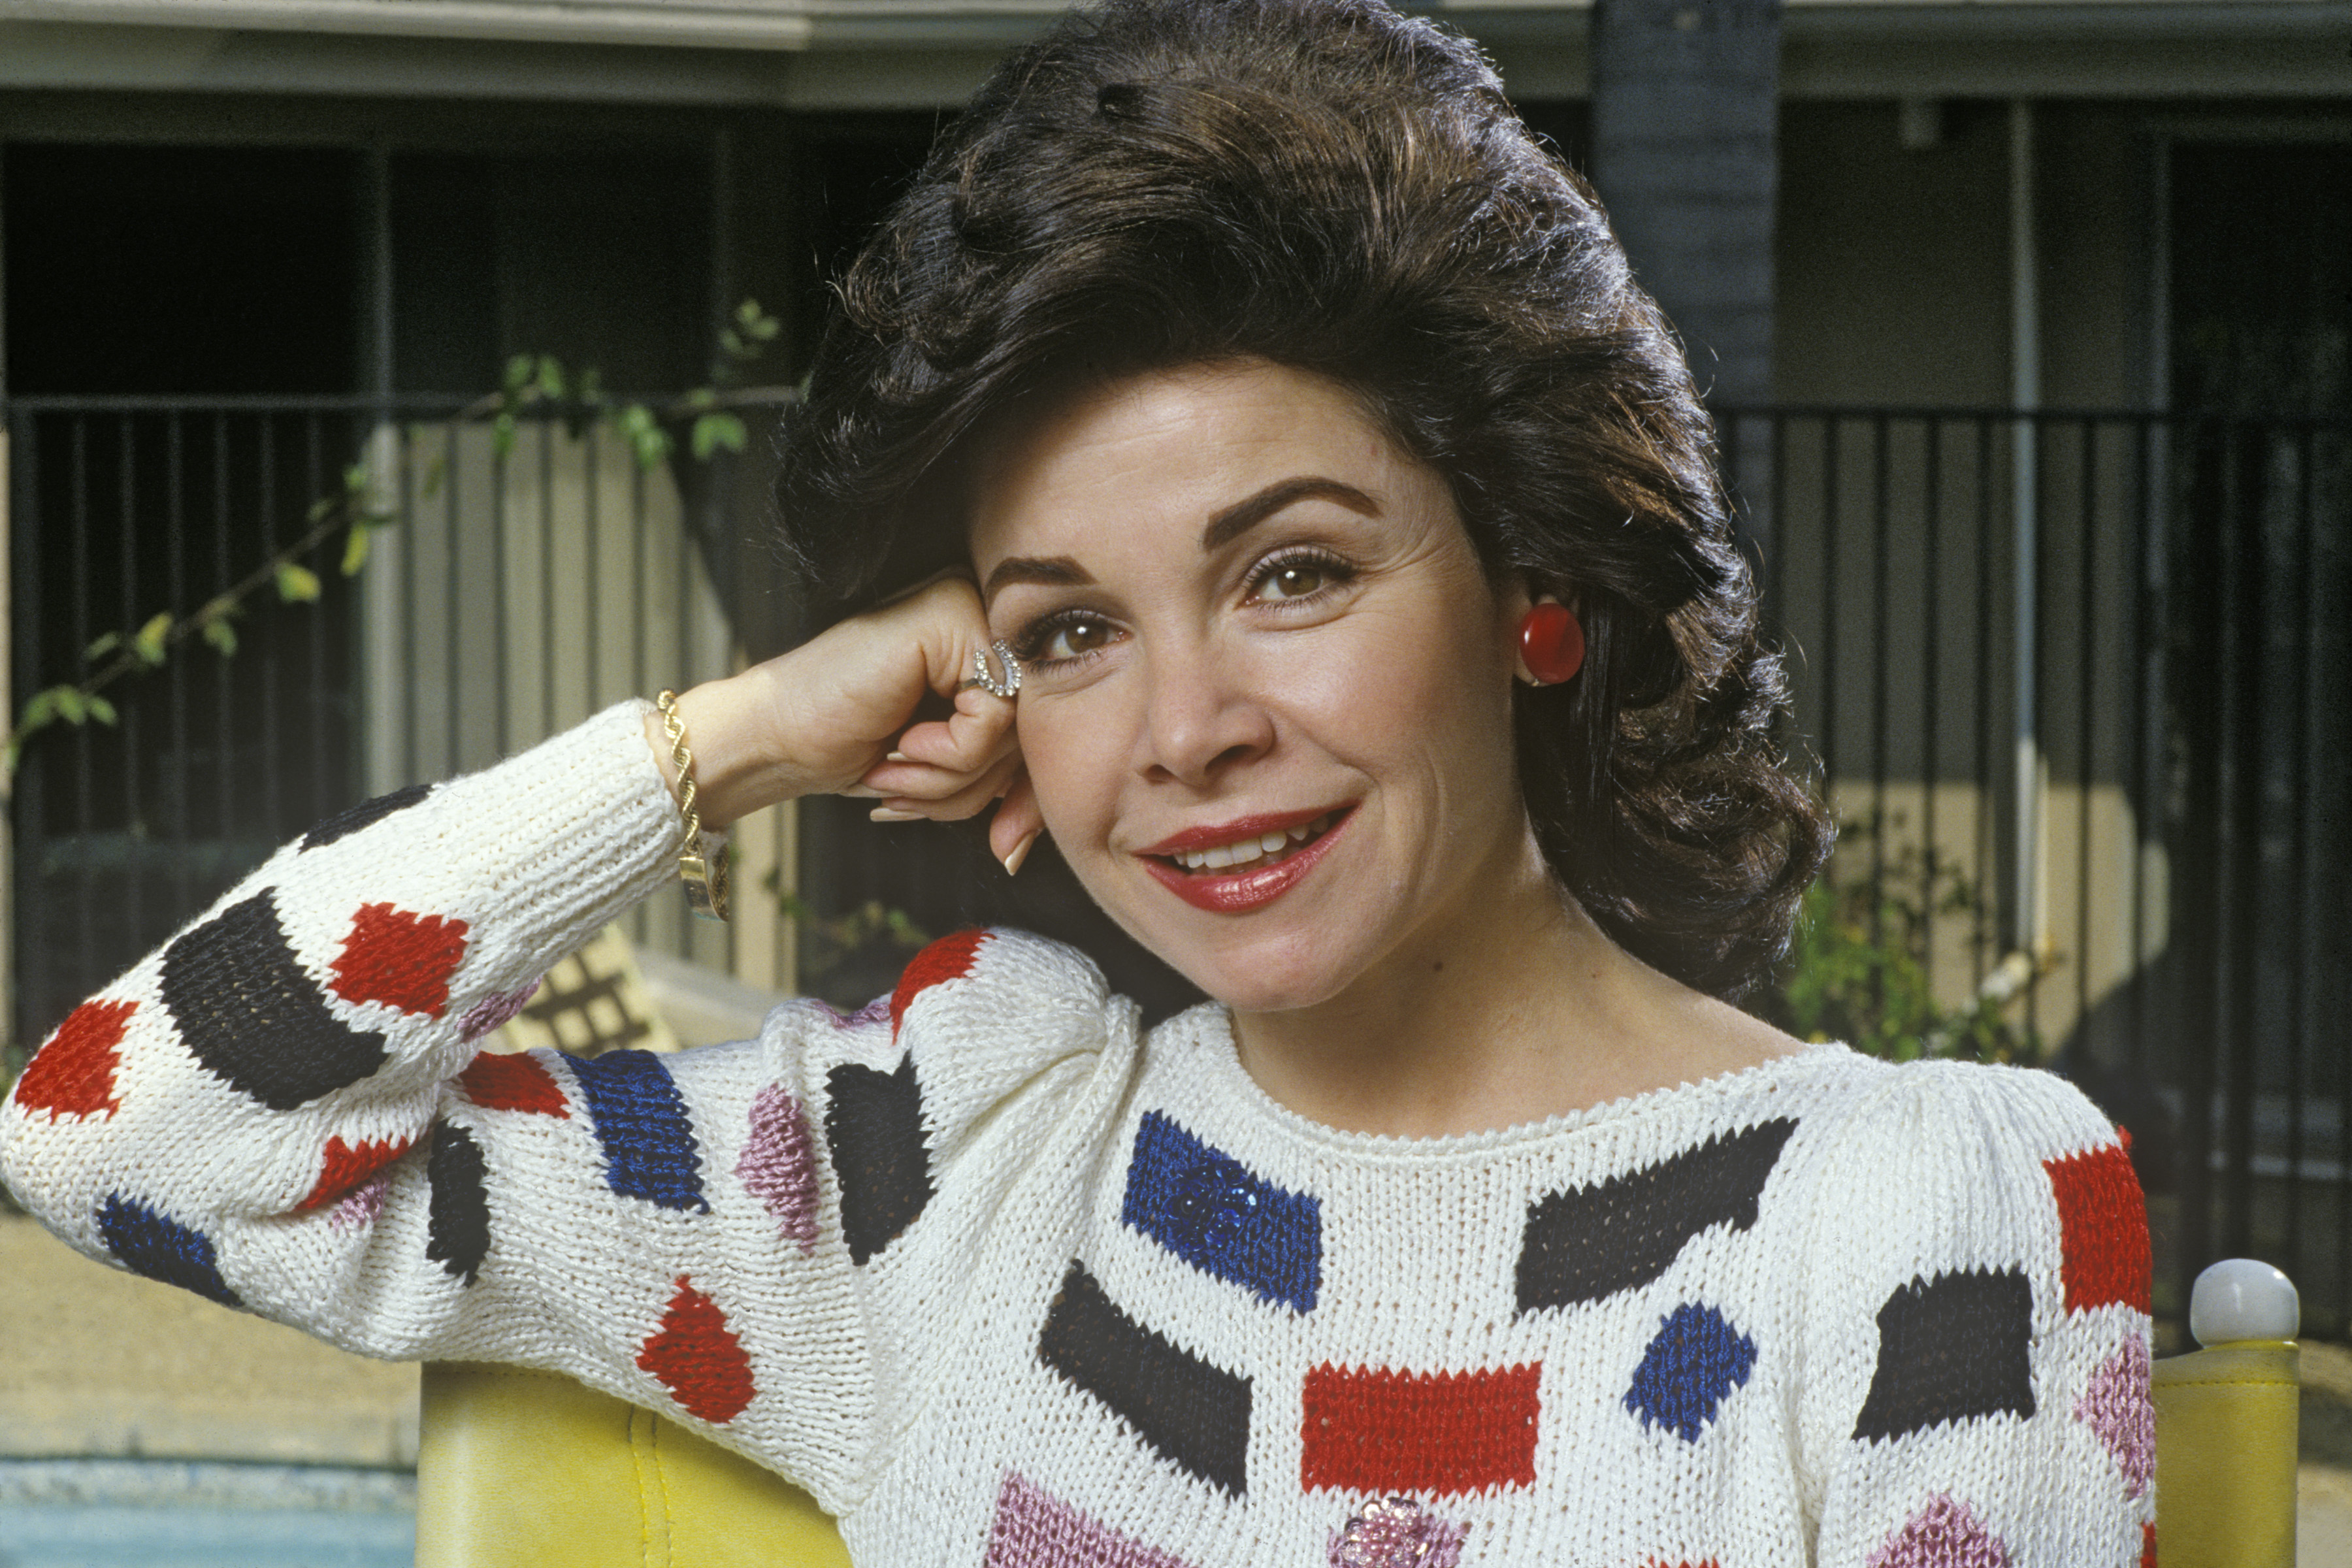 Annette Funicello, poses during a photo portrait session in Thousand Oaks, California in 1988. | Source: Getty Images